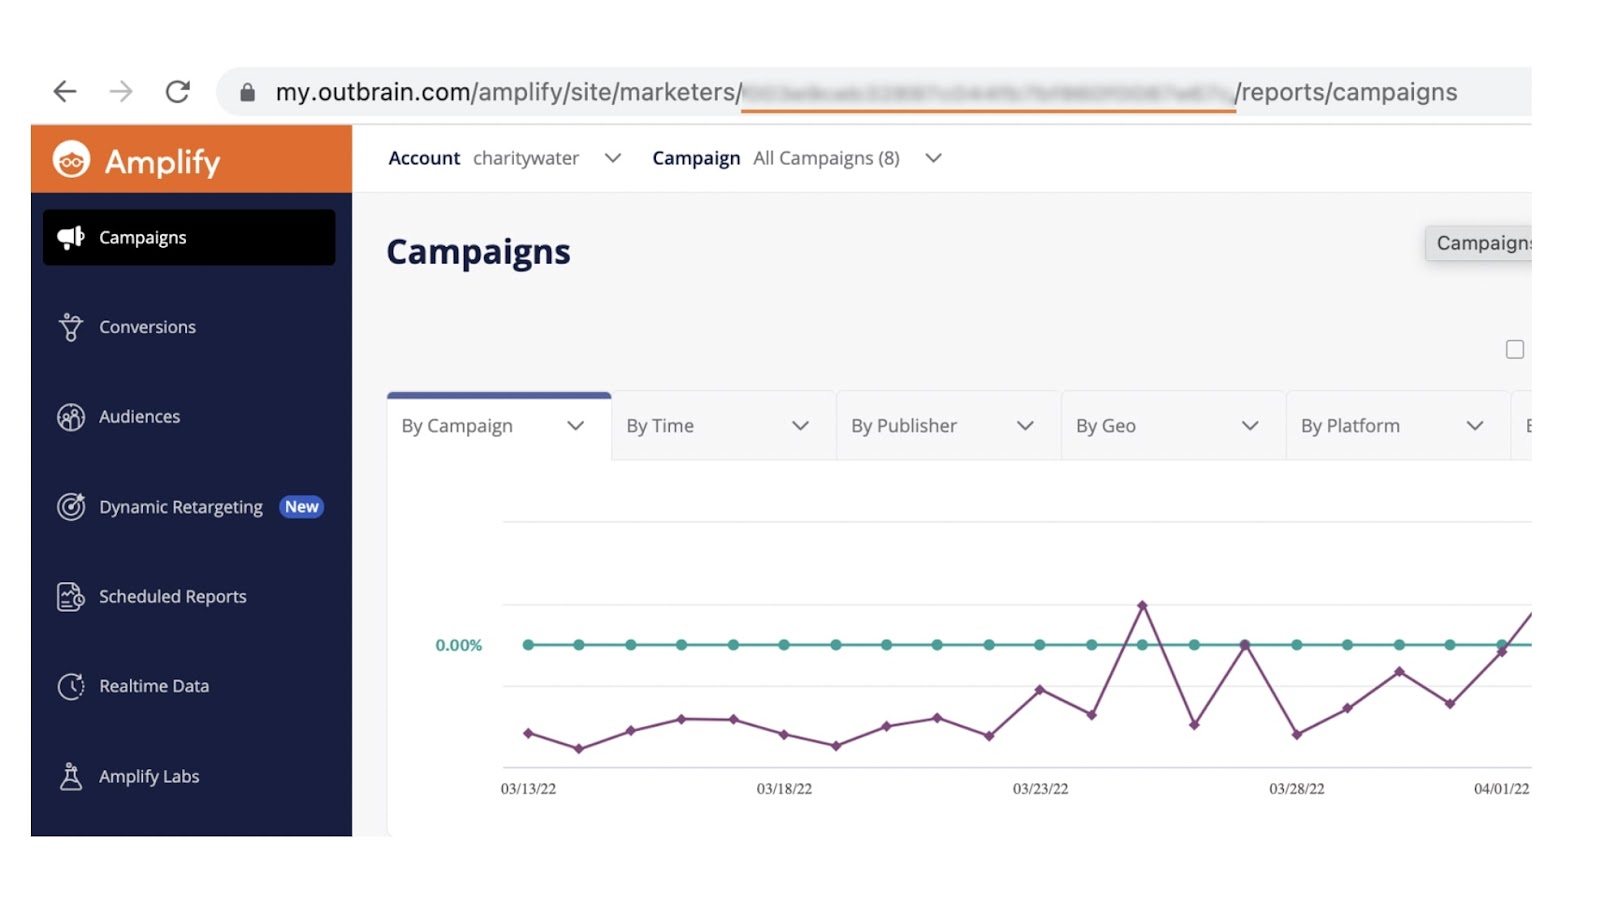 Campaigns dashboard in Outbrain